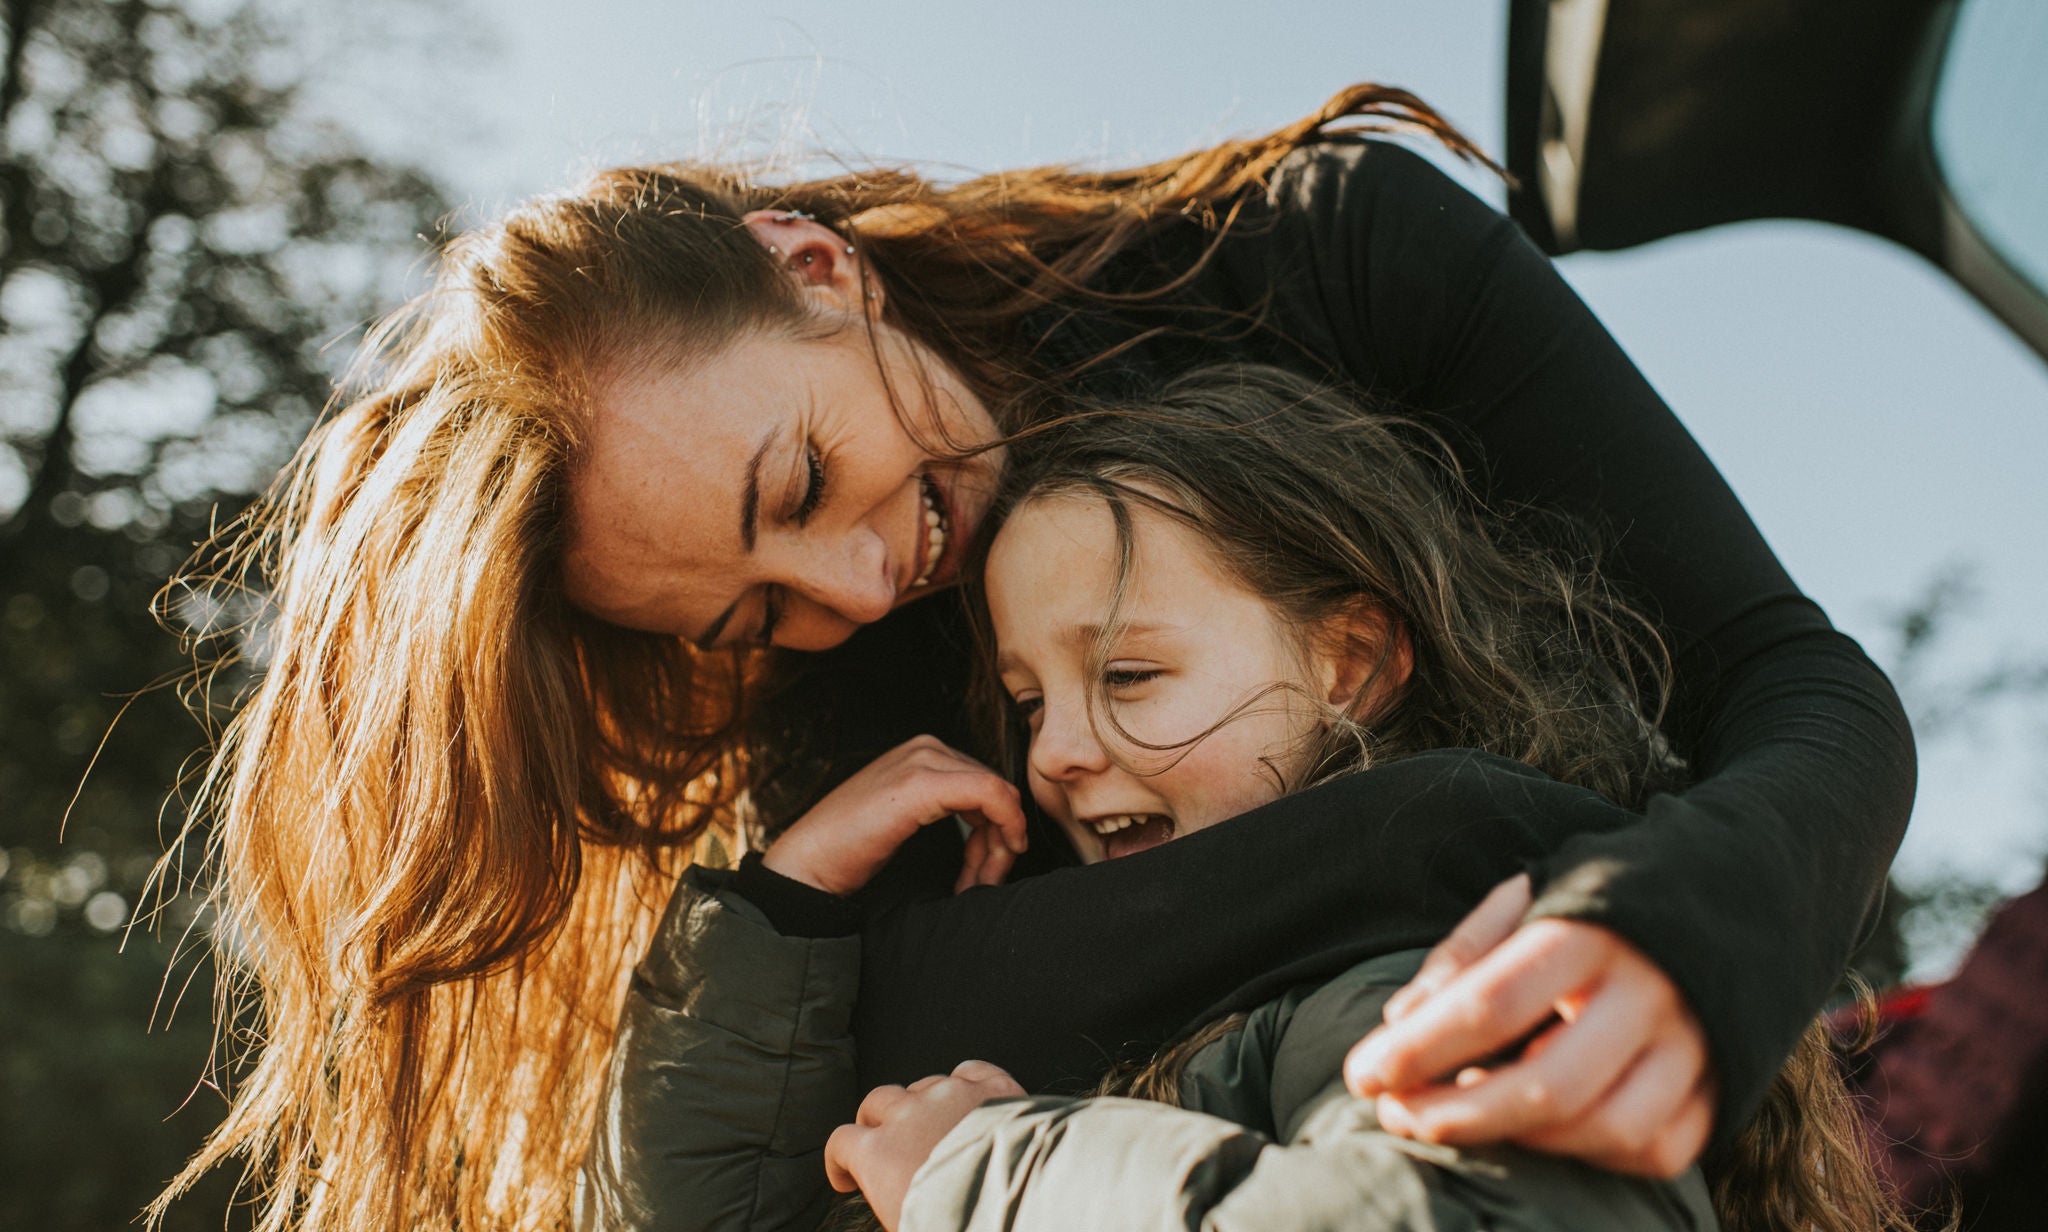 A young Mum bends over to her daughters height, and wraps her arms around her. They both wear thick winter coats as they brace the cold weather, and warm up in a loving embrace.